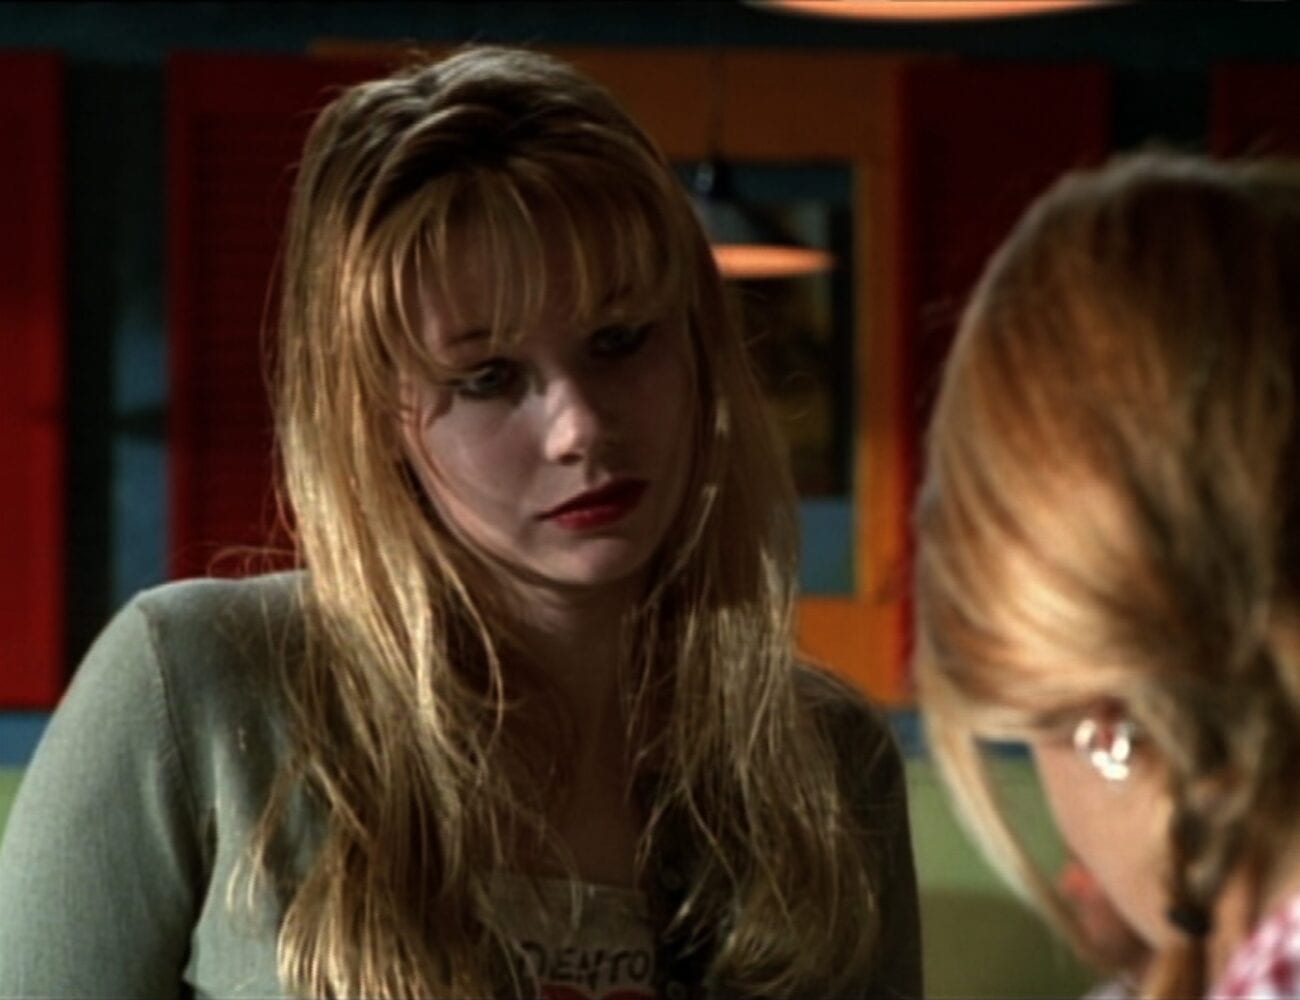 In the diner, Lily looks at Buffy, concerned